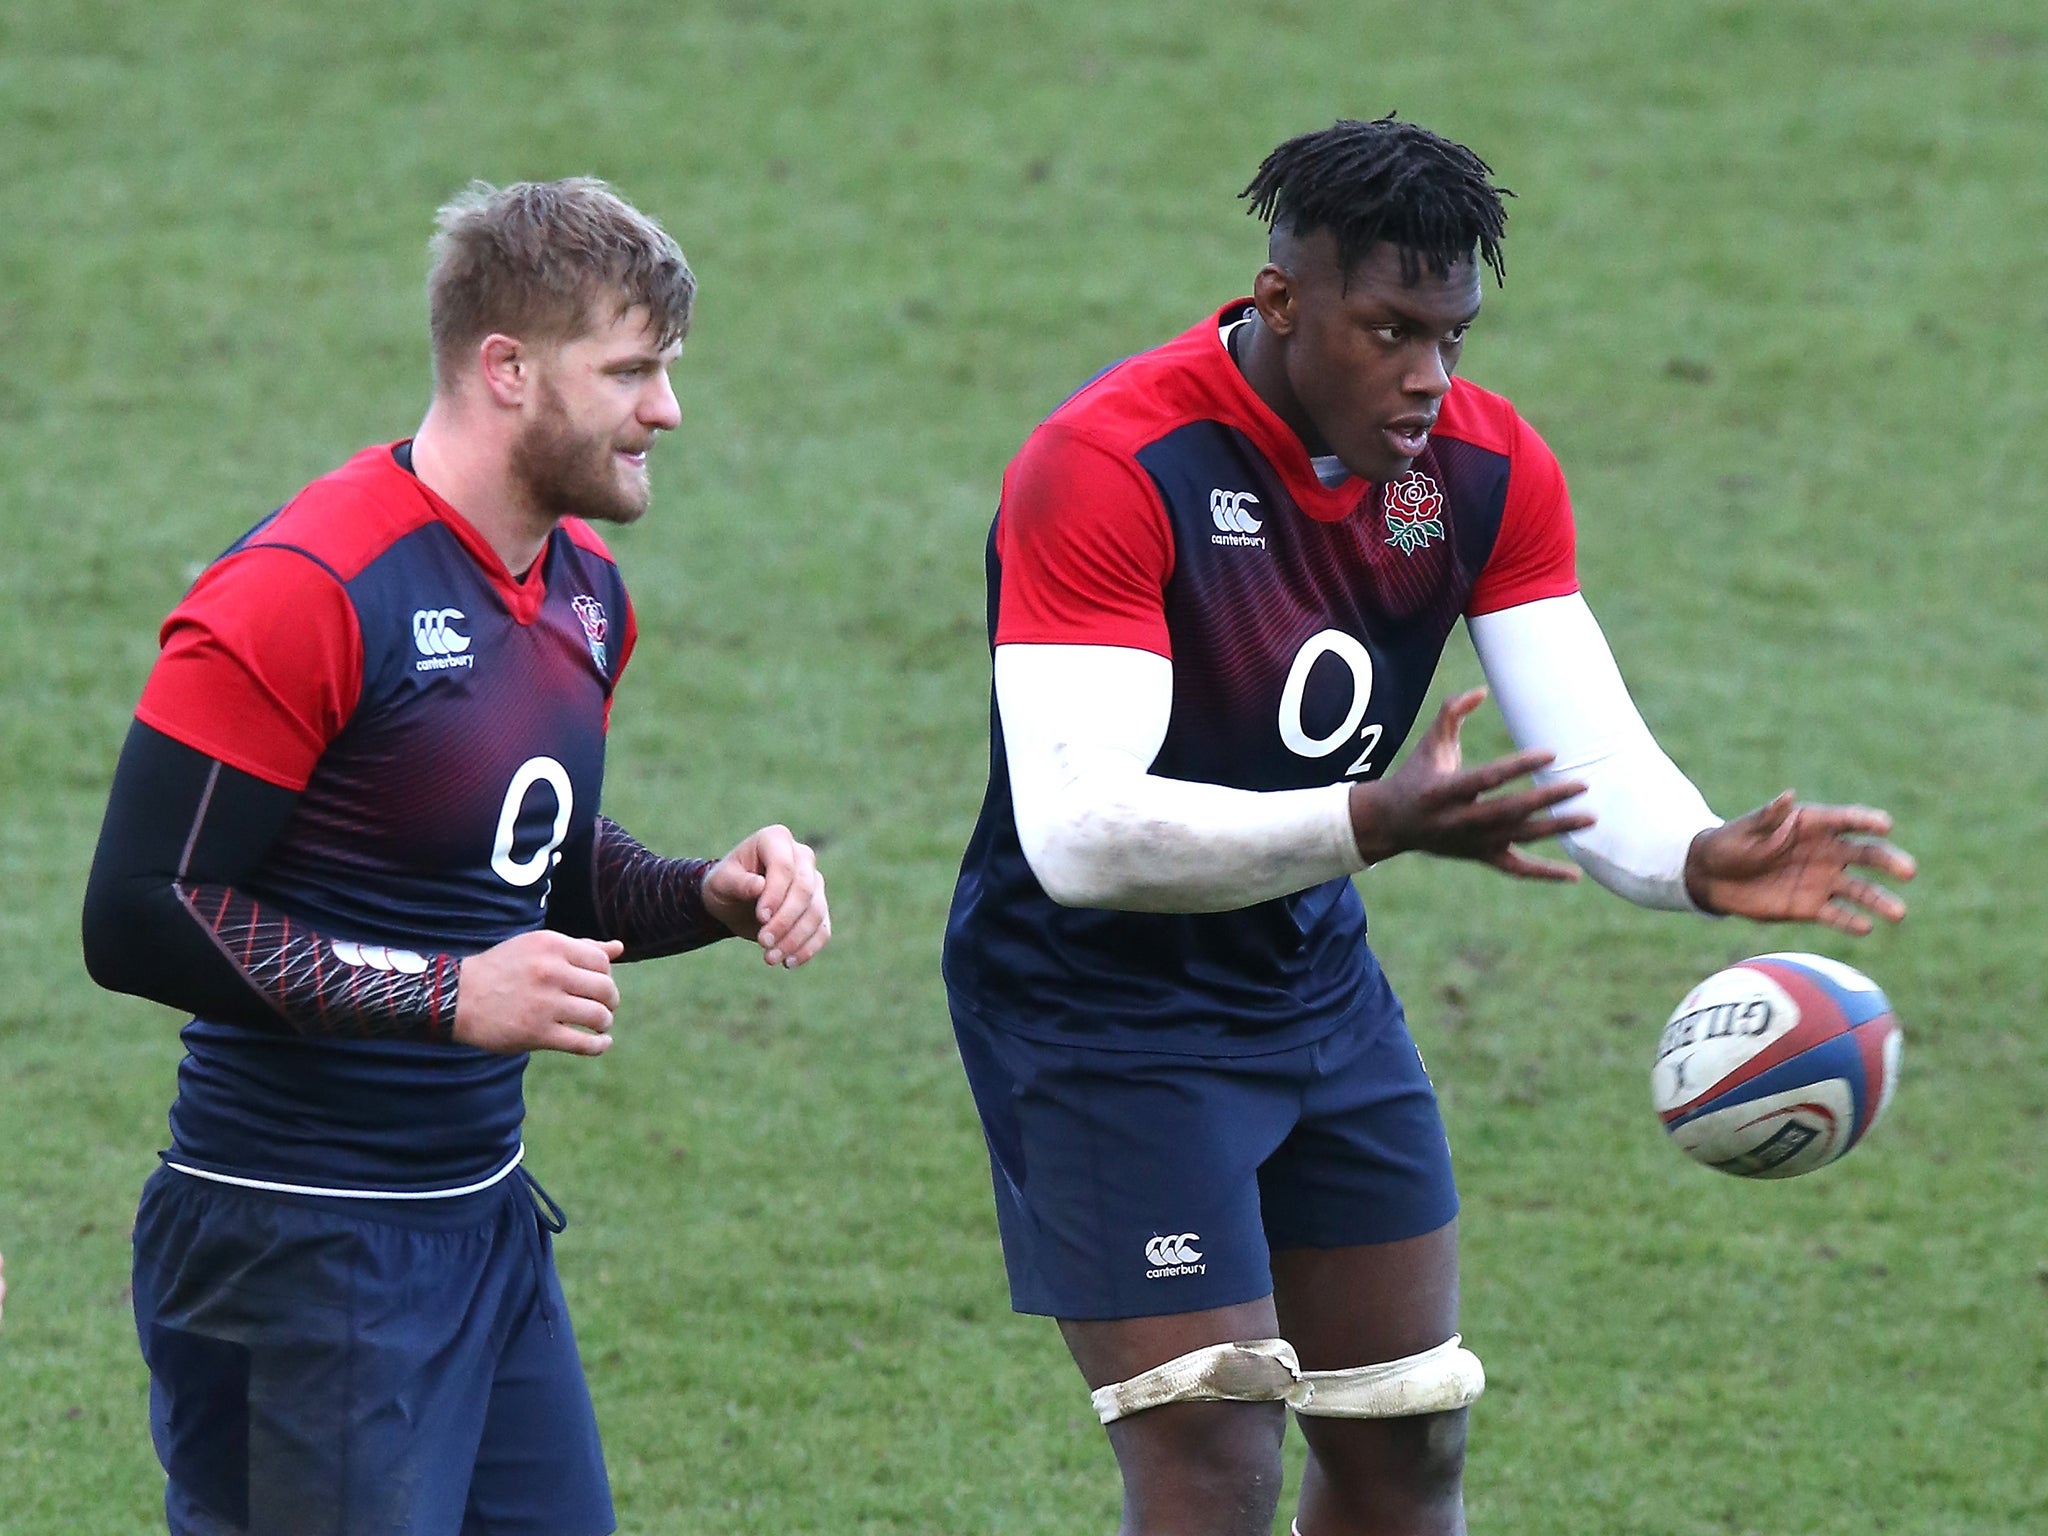 &#13;
Maro Itoje misses the match after signing a new contract this week (Getty)&#13;